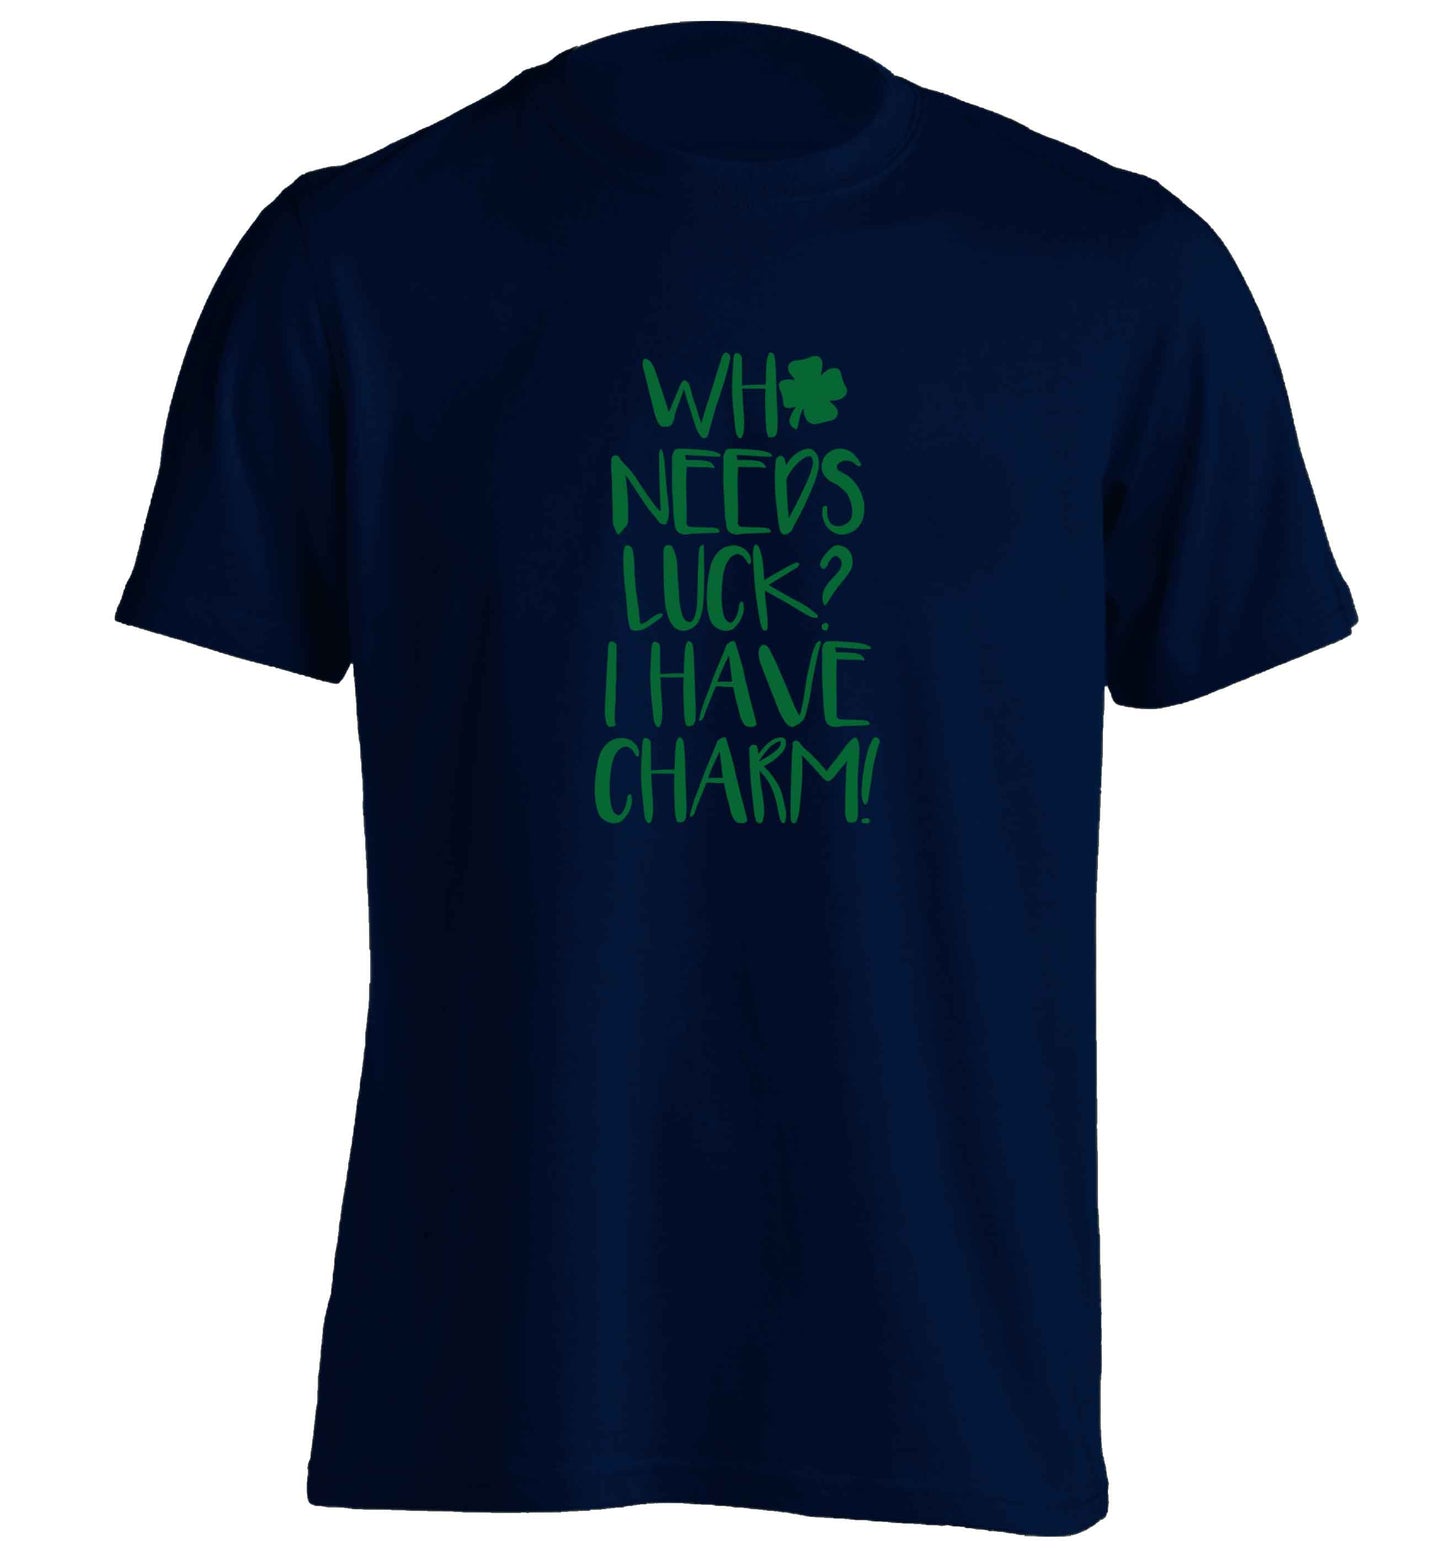 Who needs luck? I have charm! adults unisex navy Tshirt 2XL